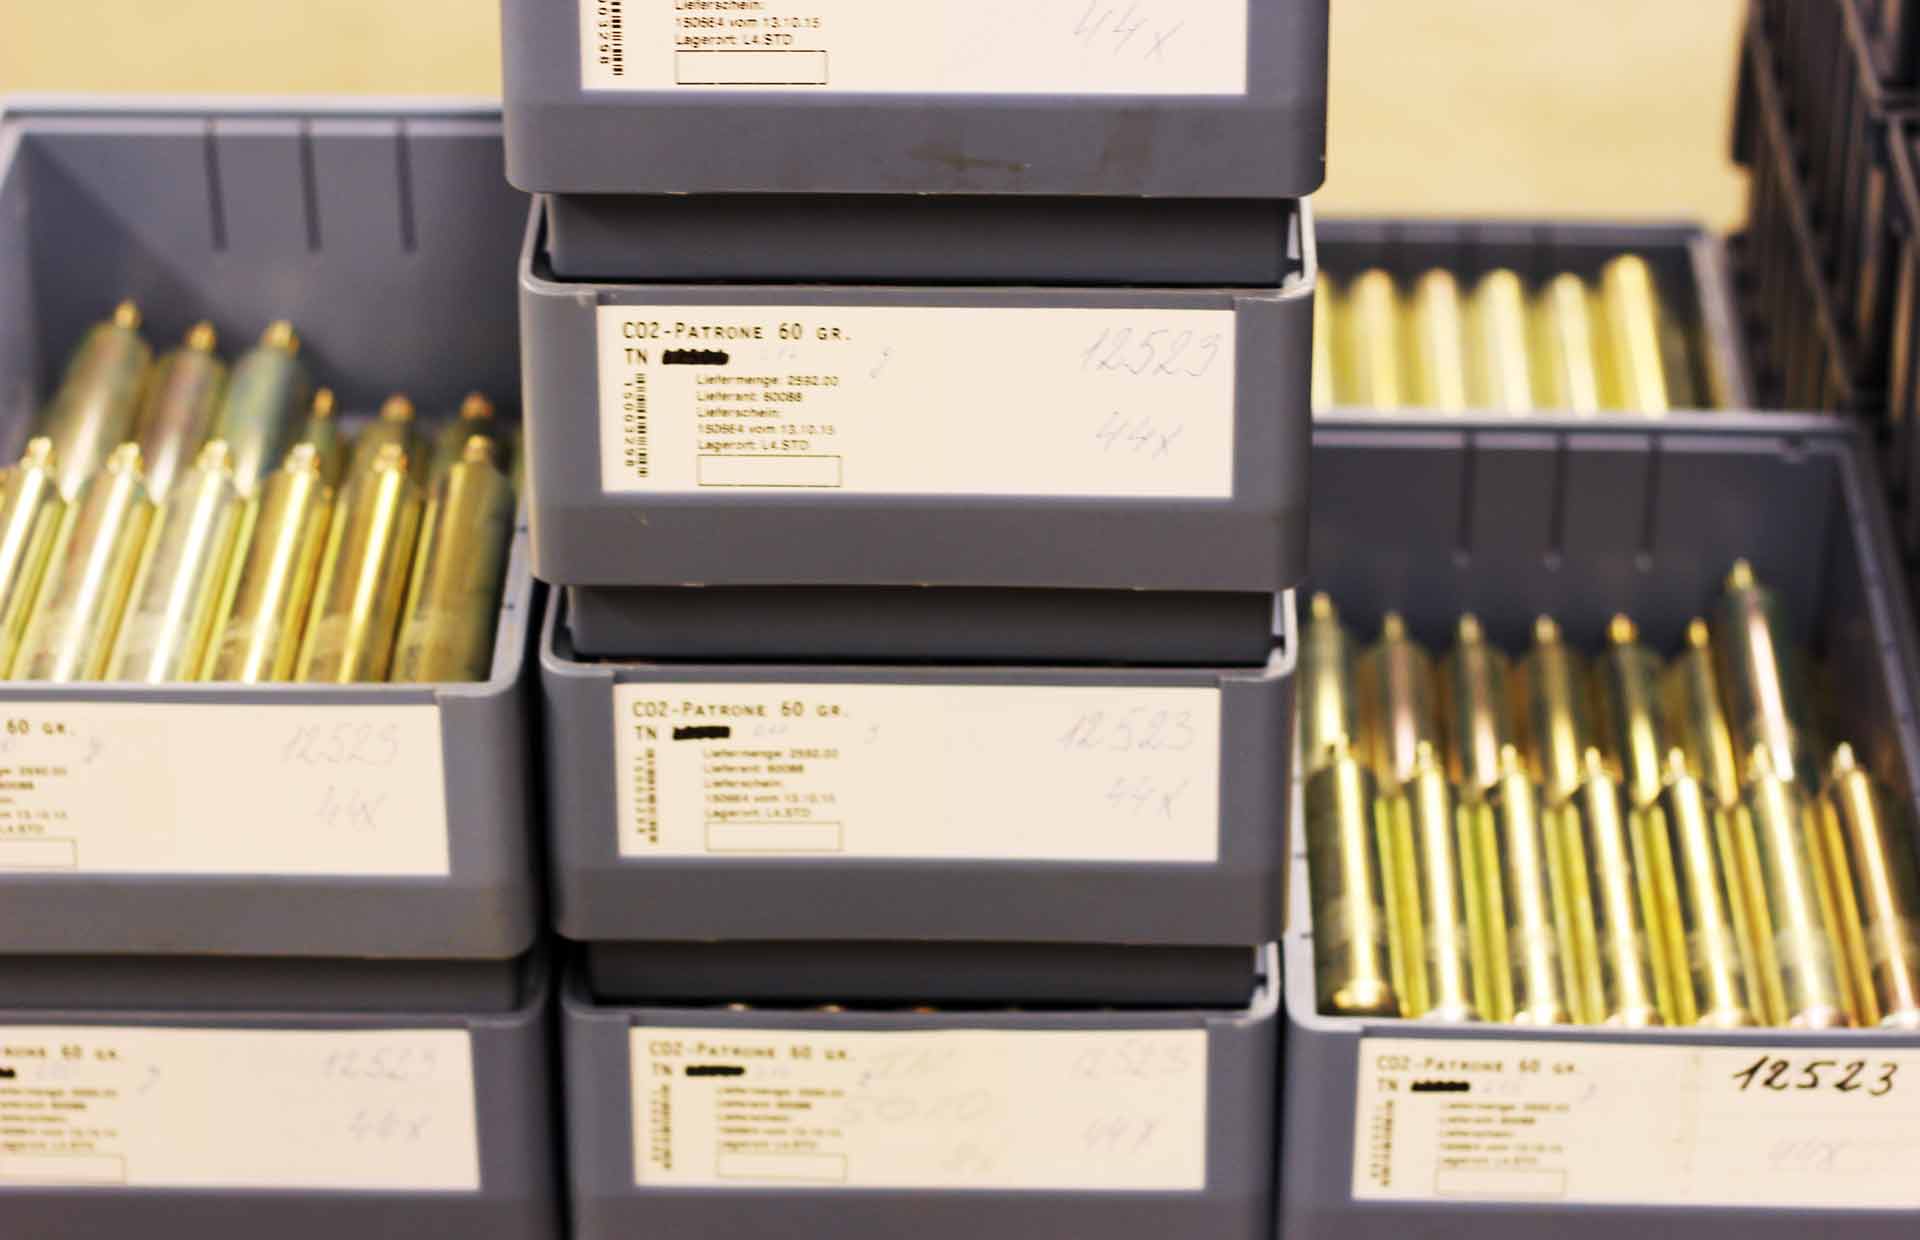 The CO2-cartridges are numbered and tested one by one